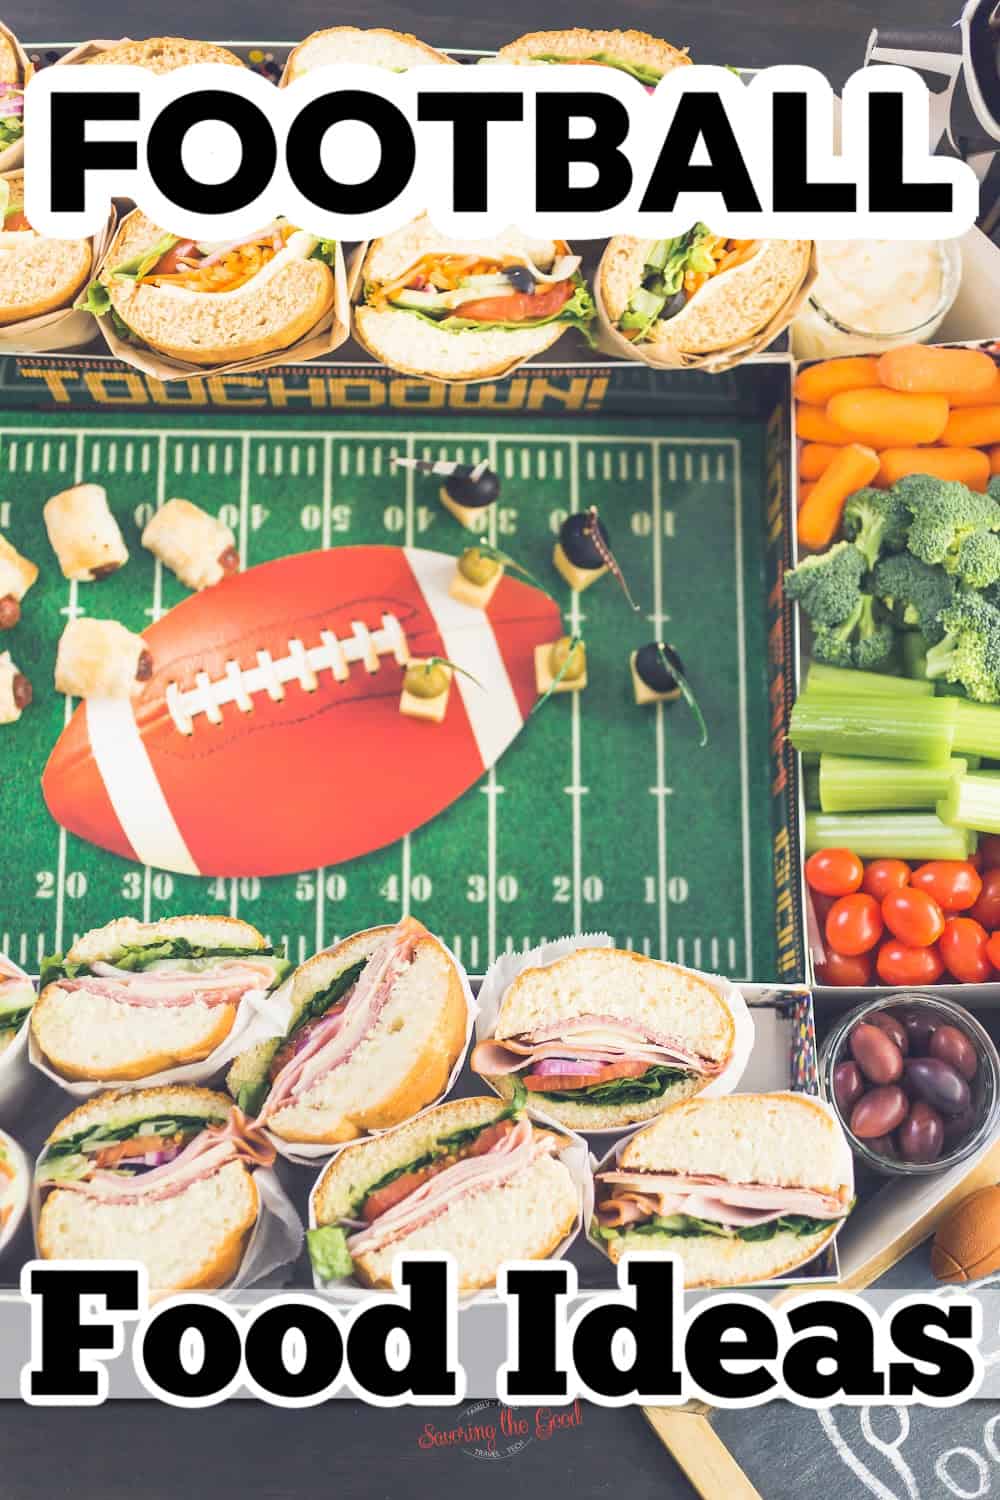 Football food ideas for a party.